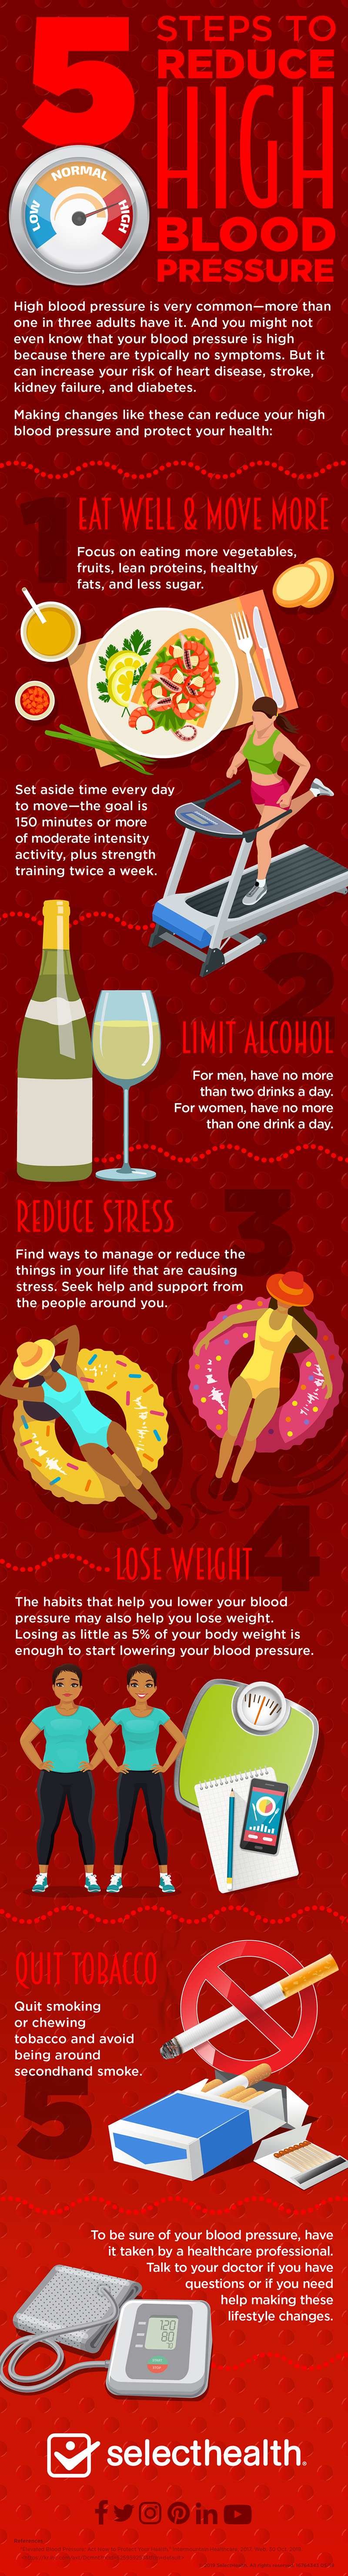 Infographic showing 5 ways to lower blood pressure